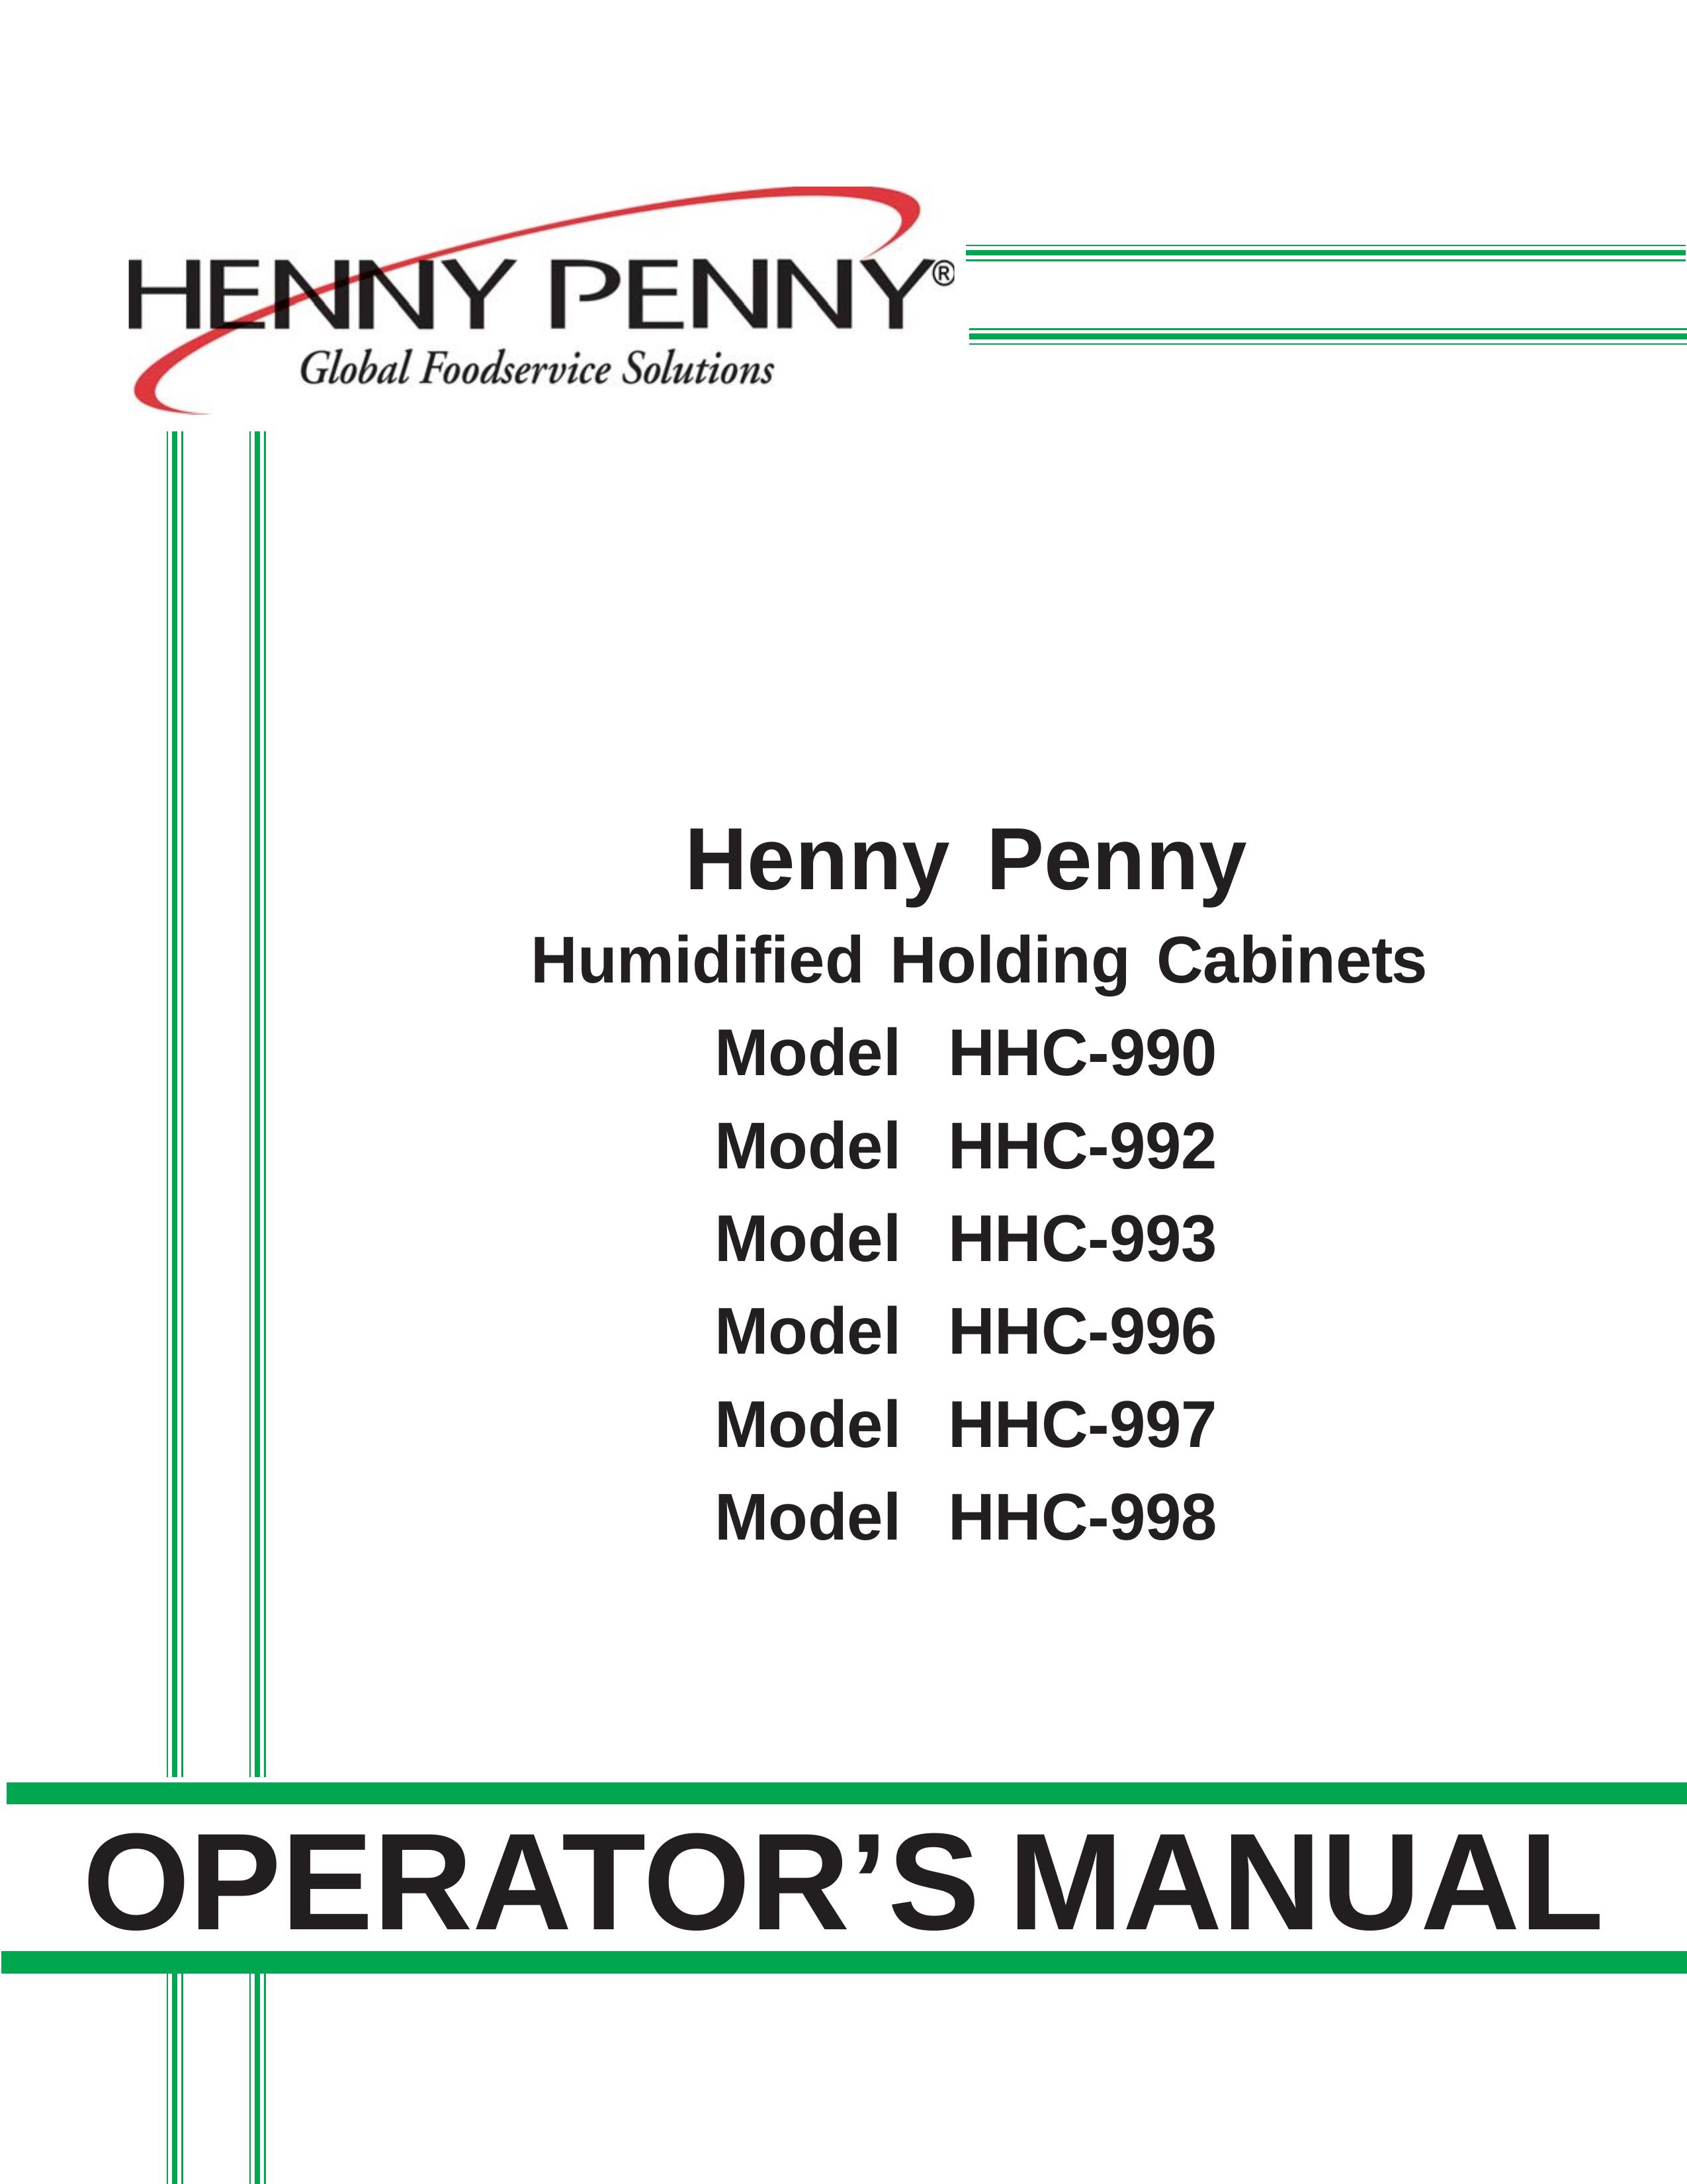 Henny Penny HHC-997 Clothes Dryer User Manual